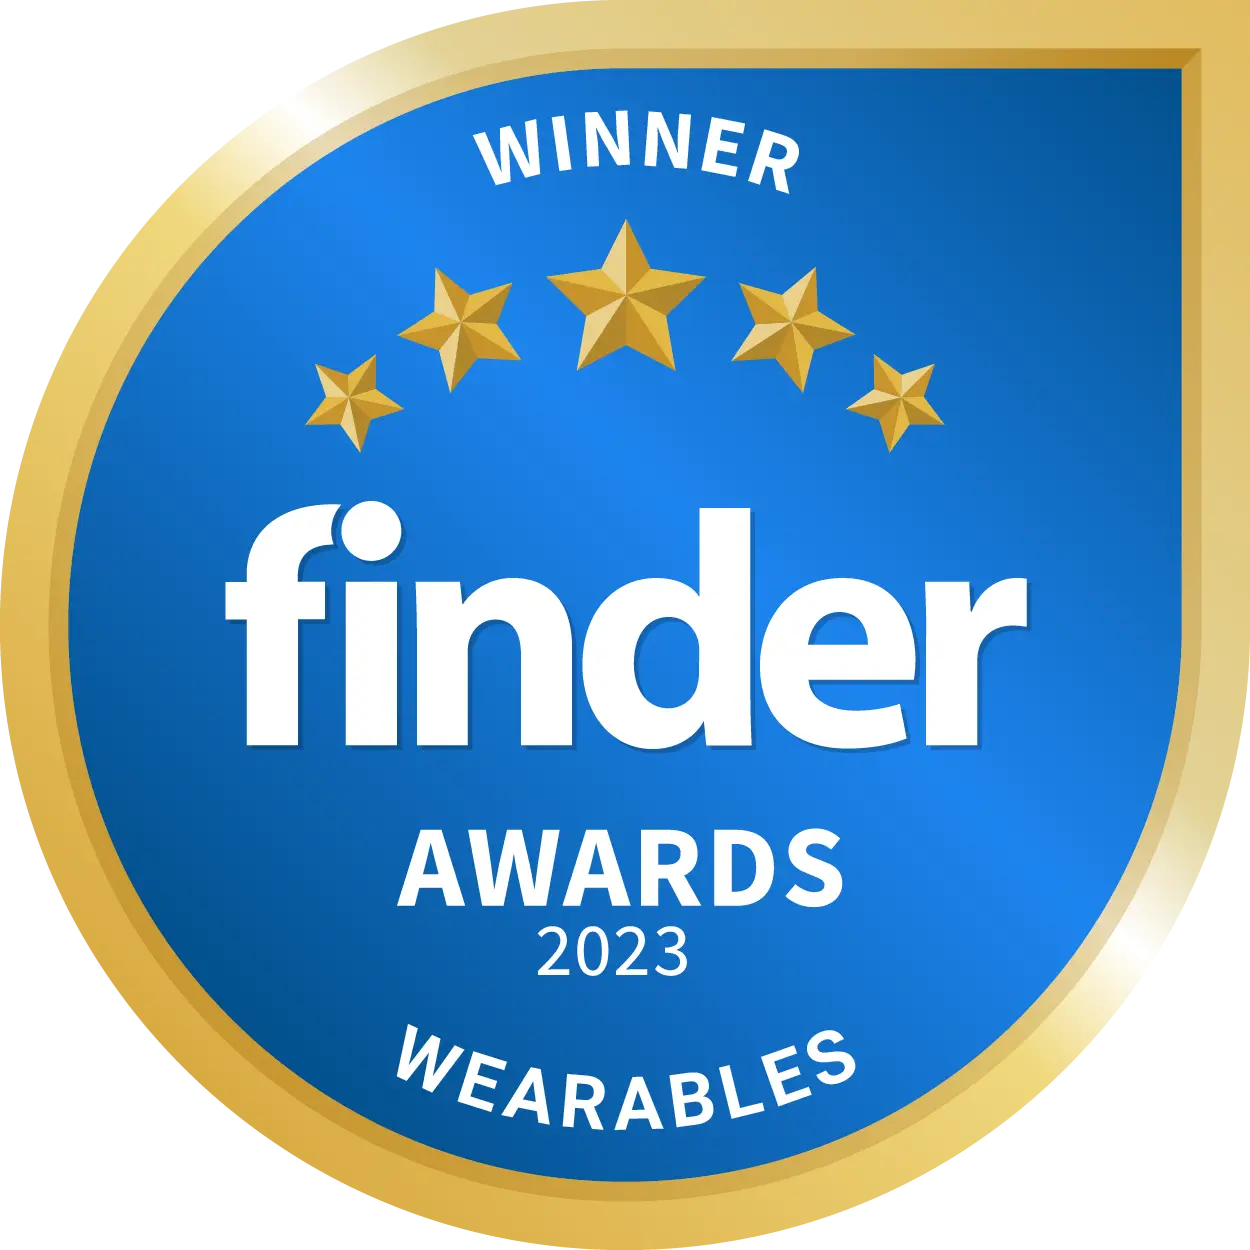 Best-rated wearables brand